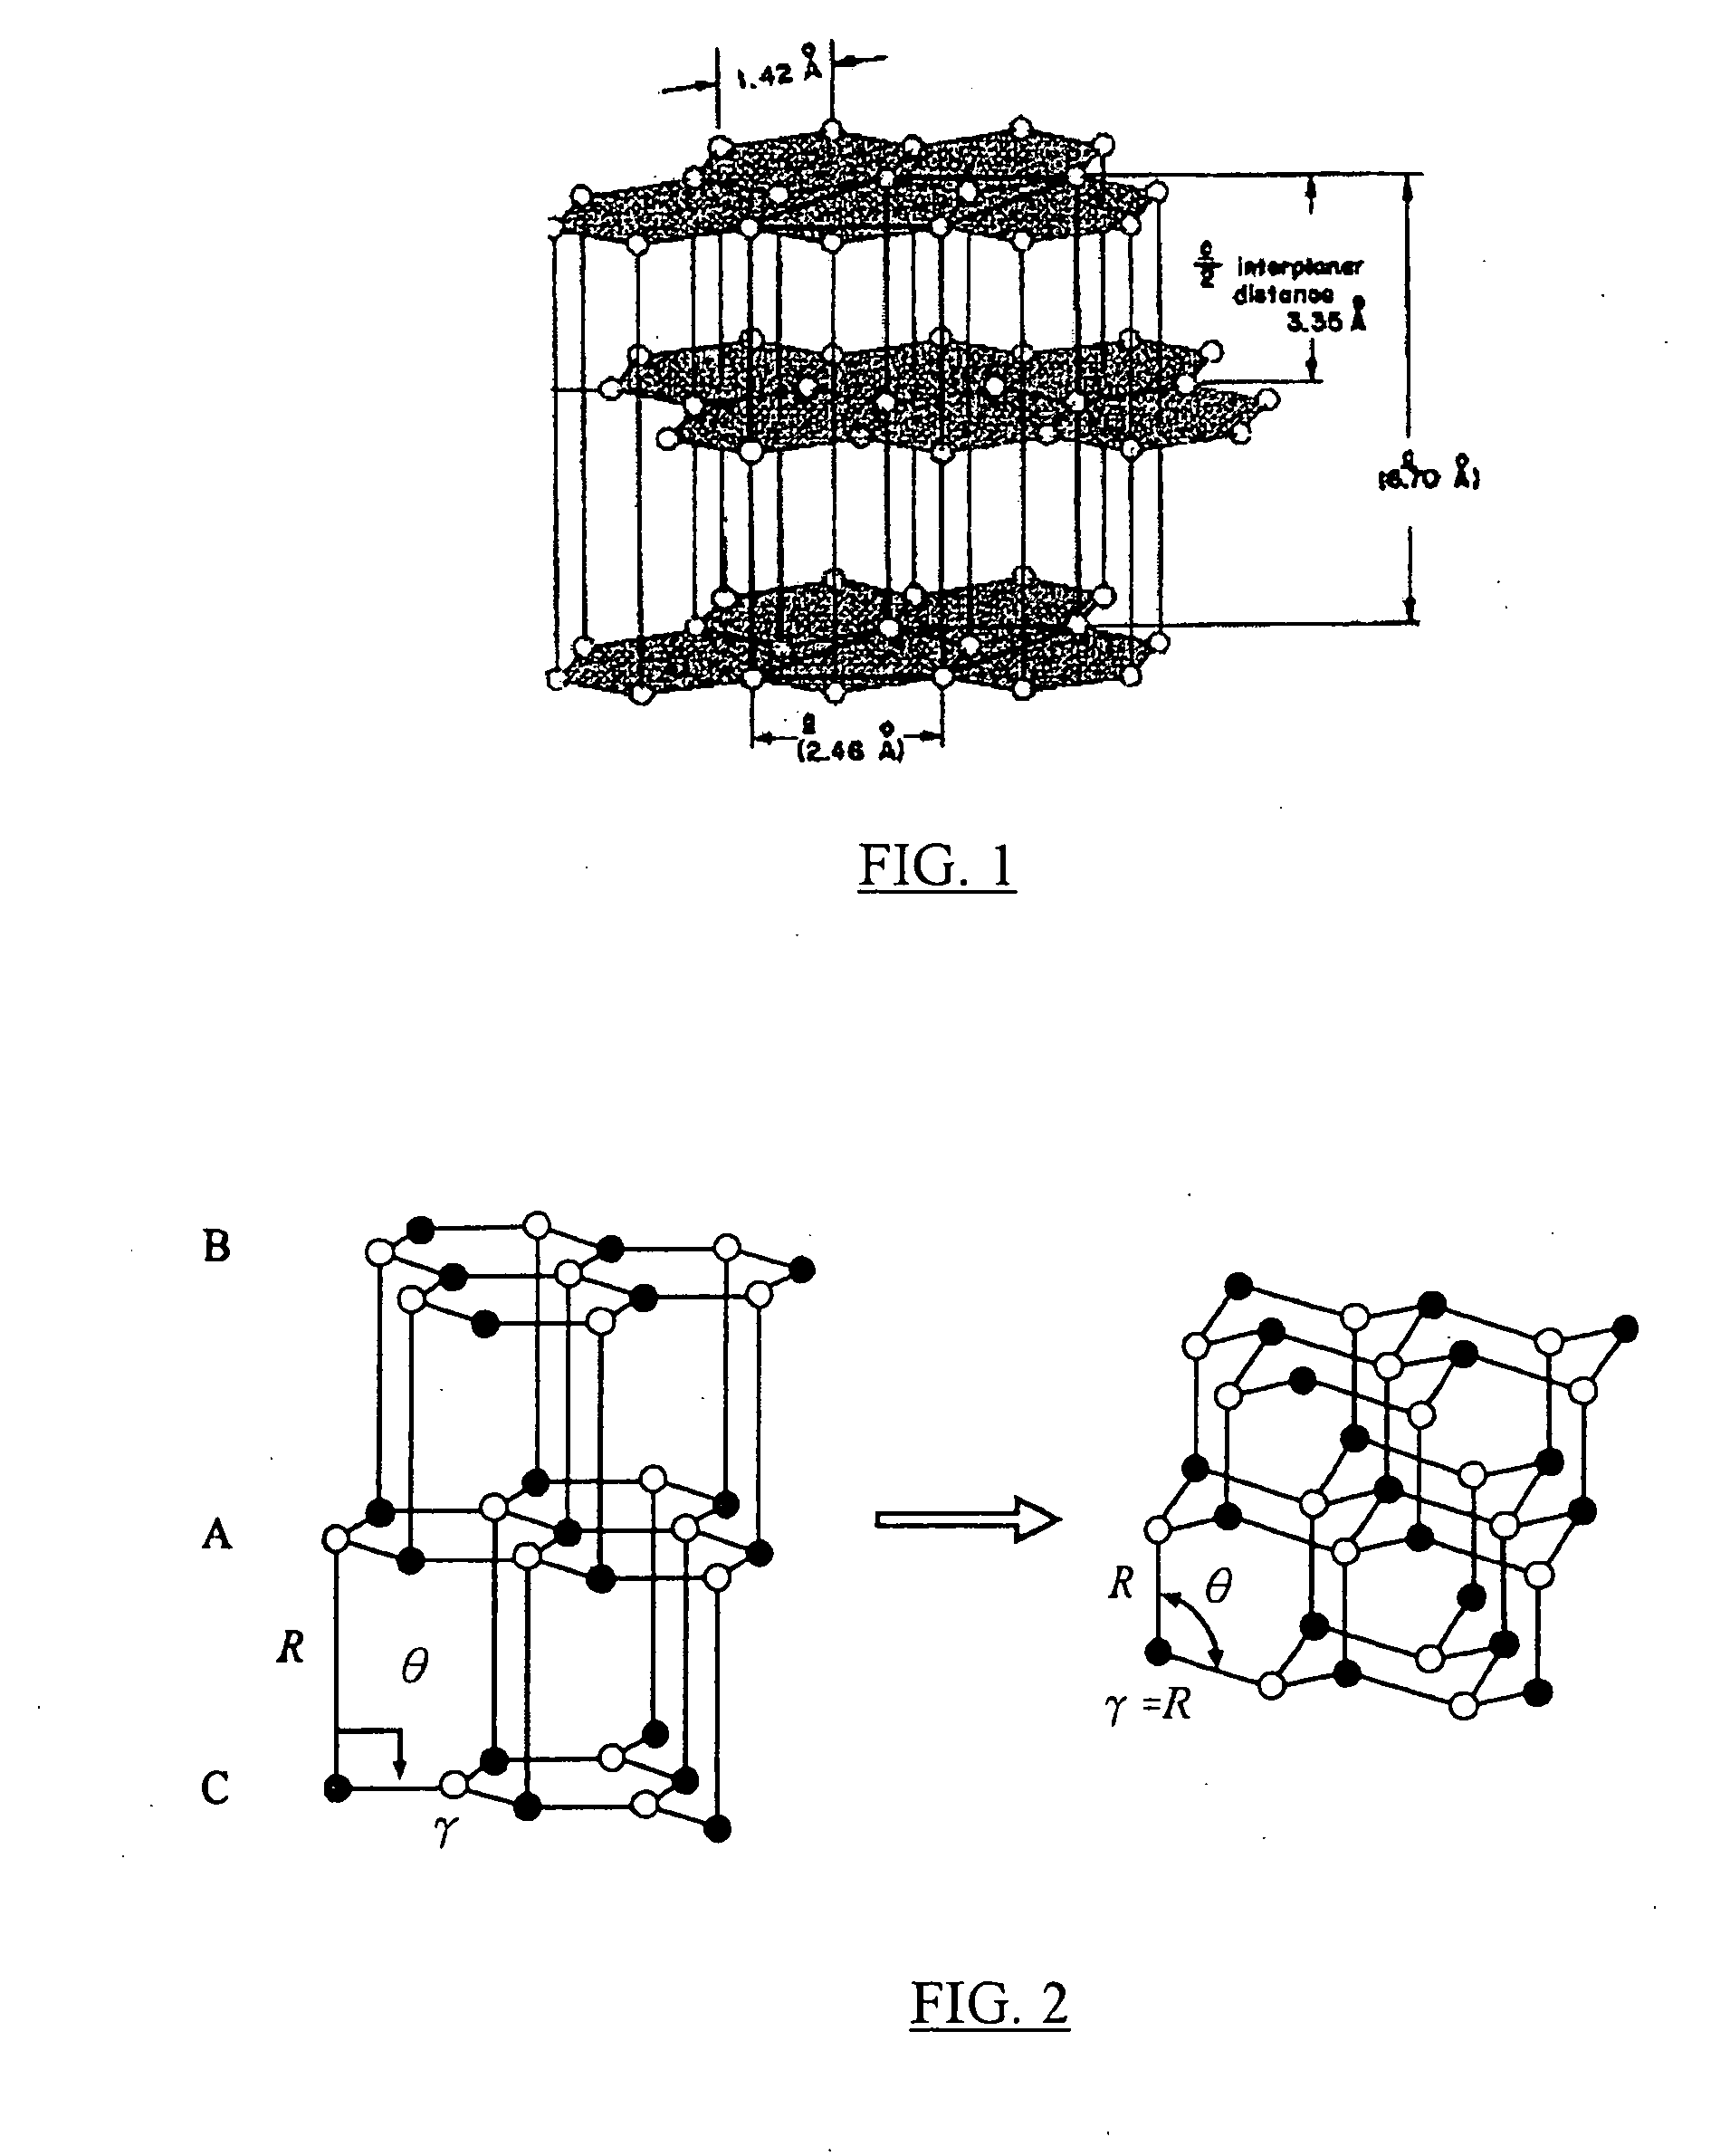 Methods of forming polycrystalline bodies using rhombohedral graphite materials